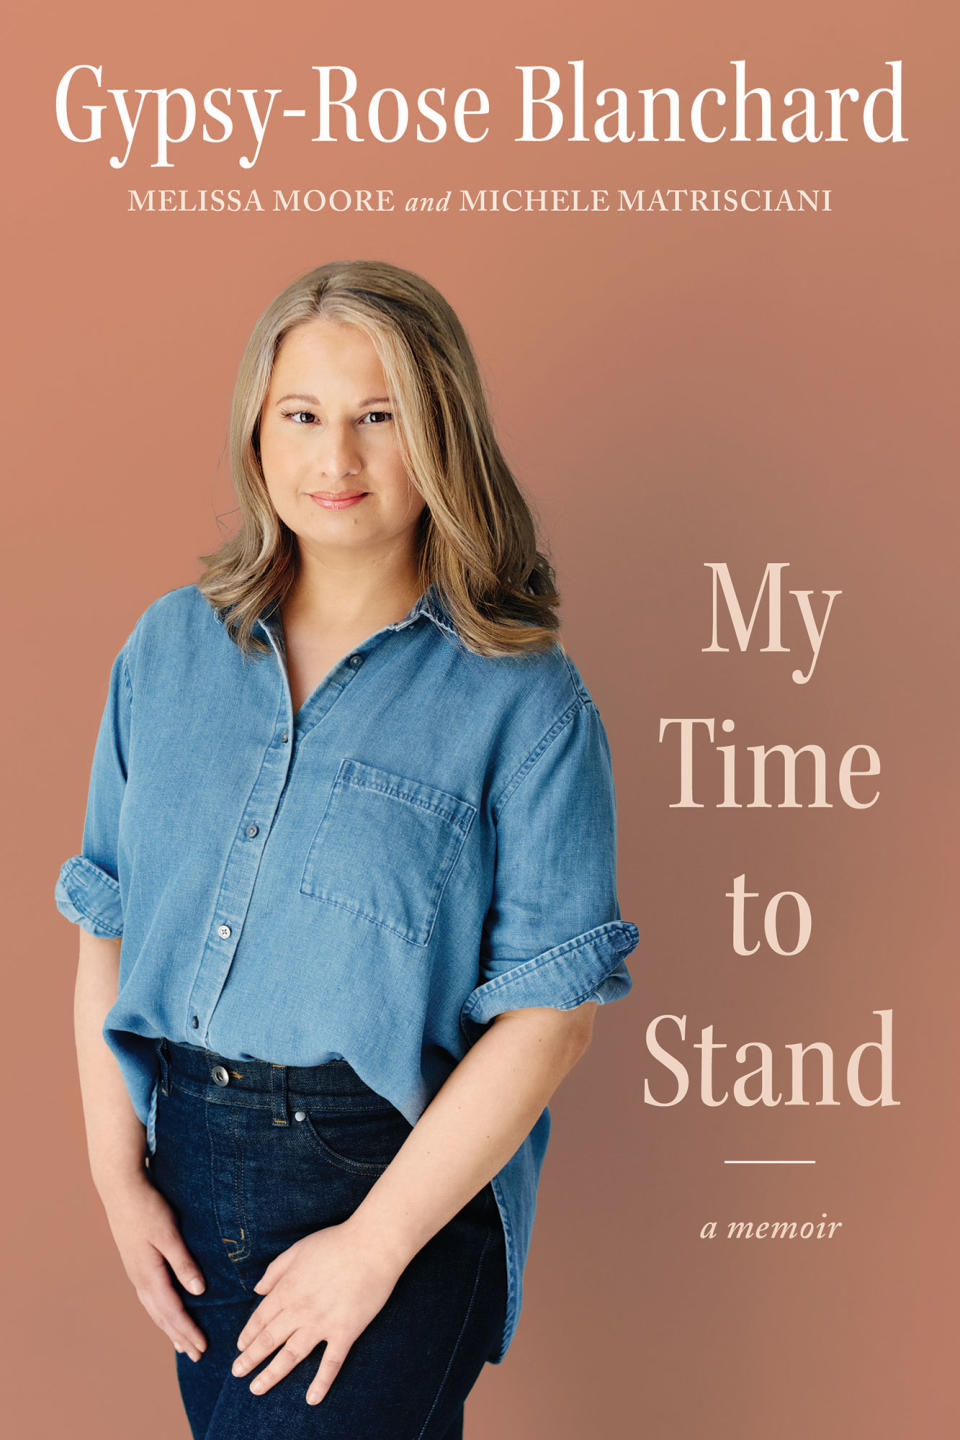 Gypsy Rose Blanchard Reveals She Wrote a Memoir About Her Experience After Prison Release Mt Time To Stand Book Cover